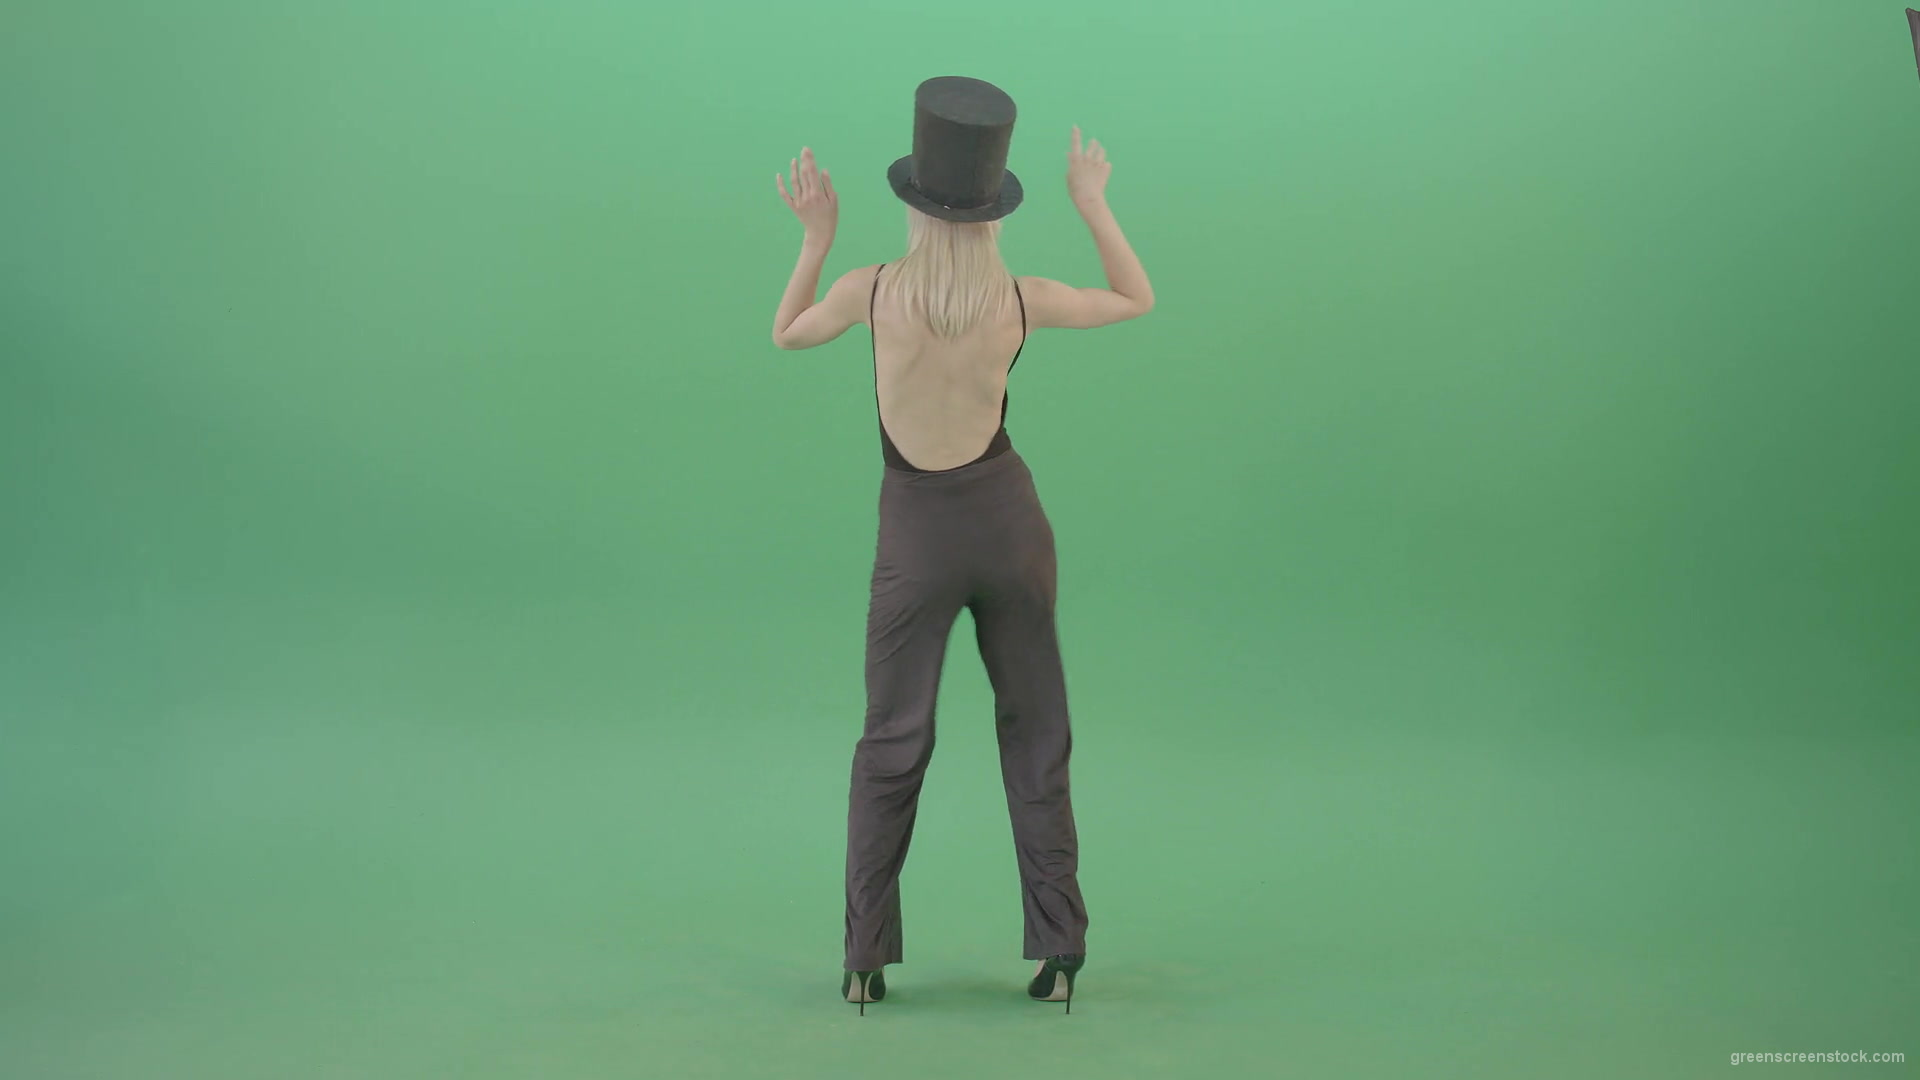 Girl-with-black-busines-cylinder-hat-dancing-isolated-on-green-background-4K-Video-Footage-1920_008 Green Screen Stock